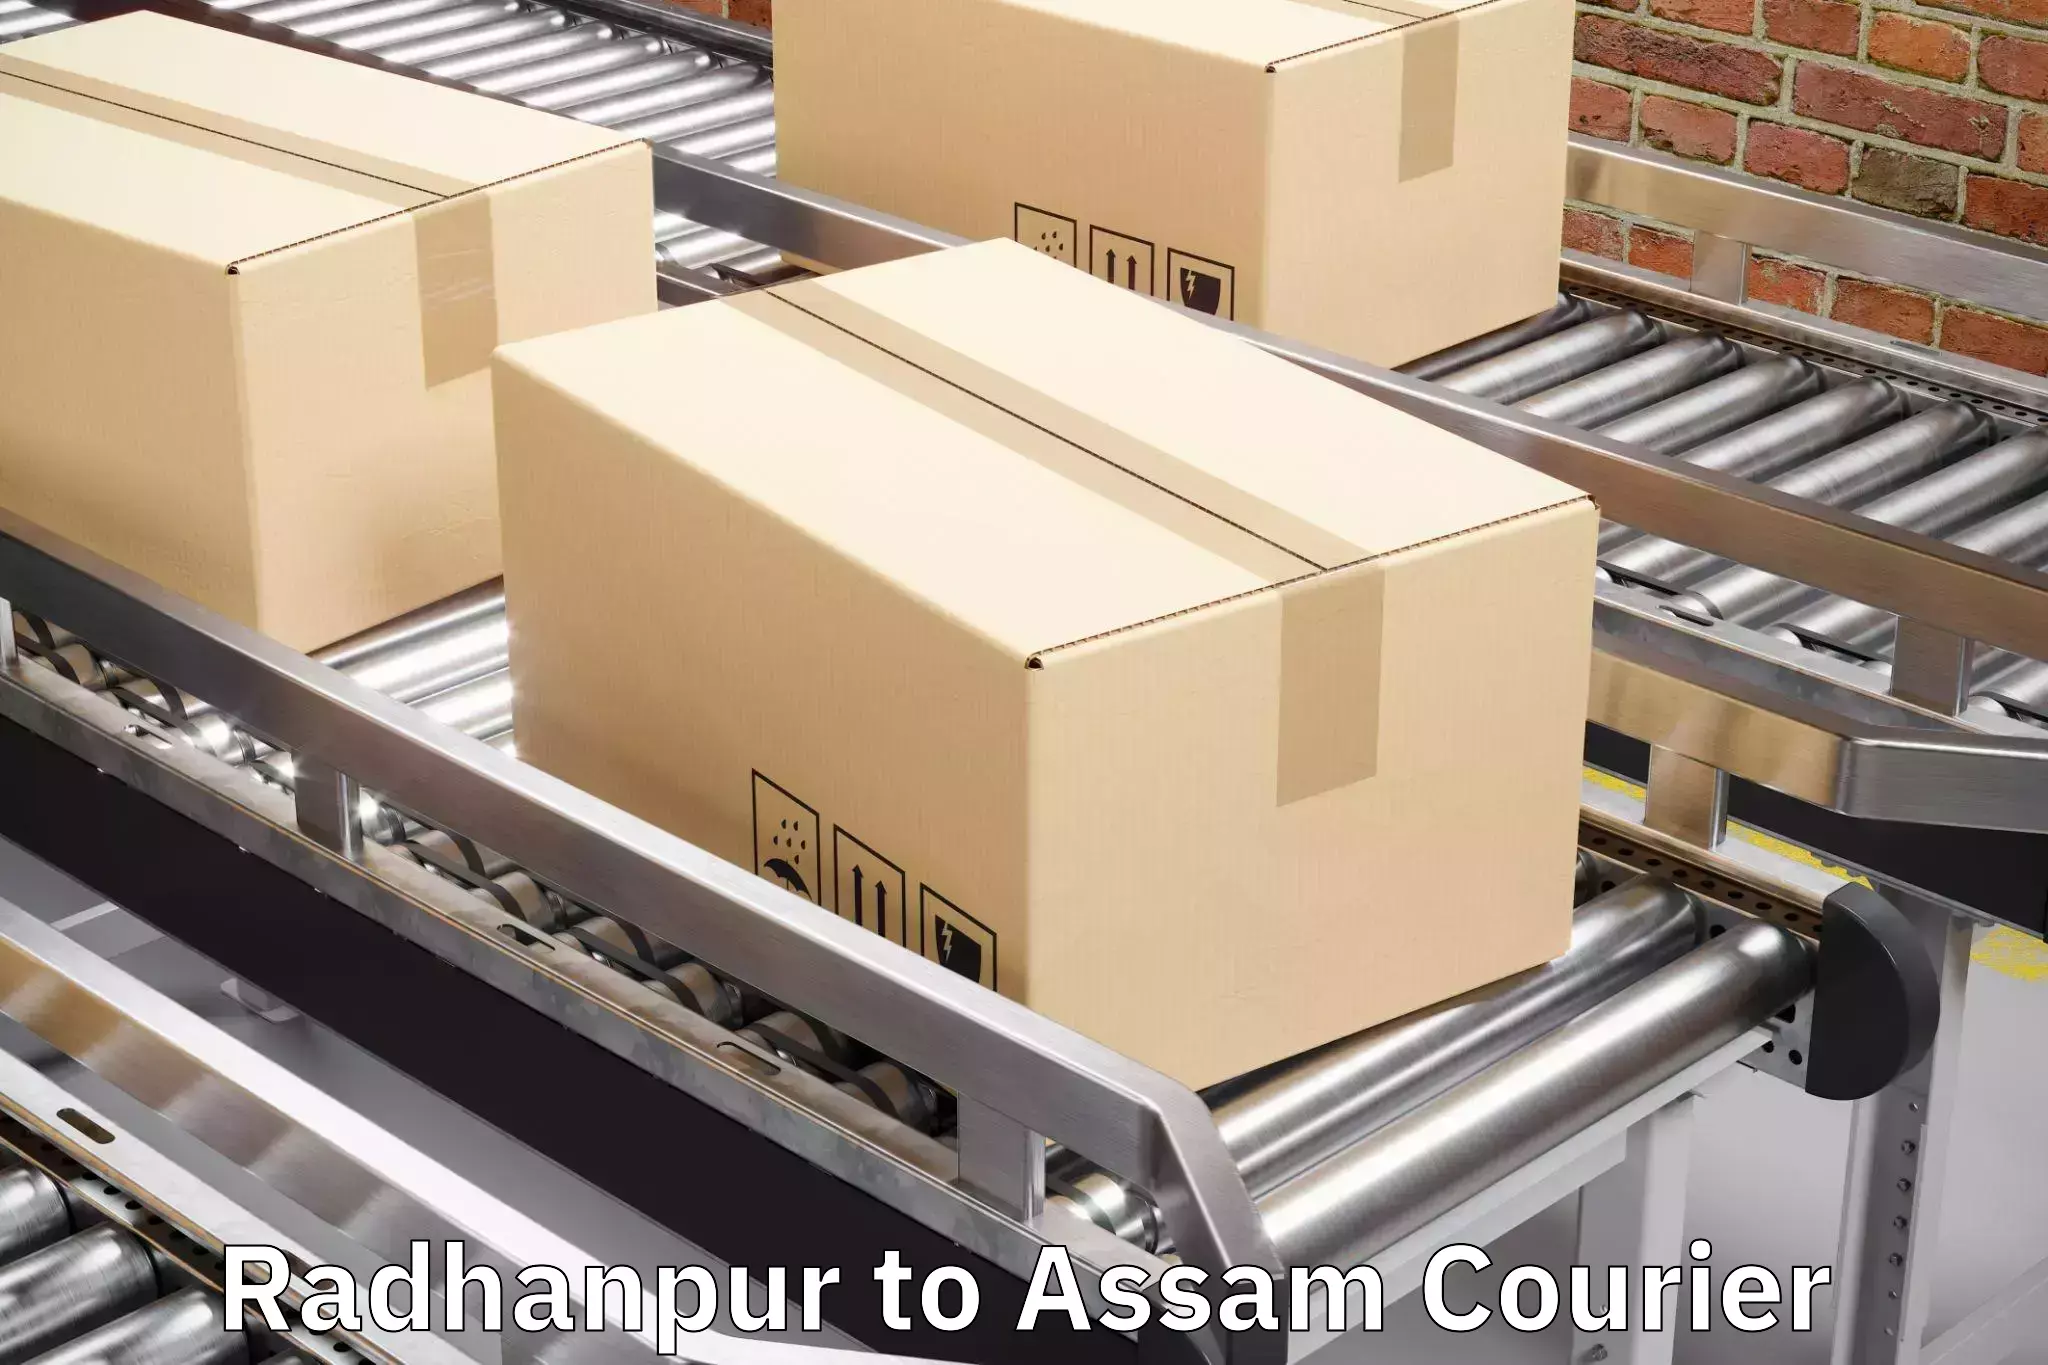 Baggage shipping experts Radhanpur to Lala Assam